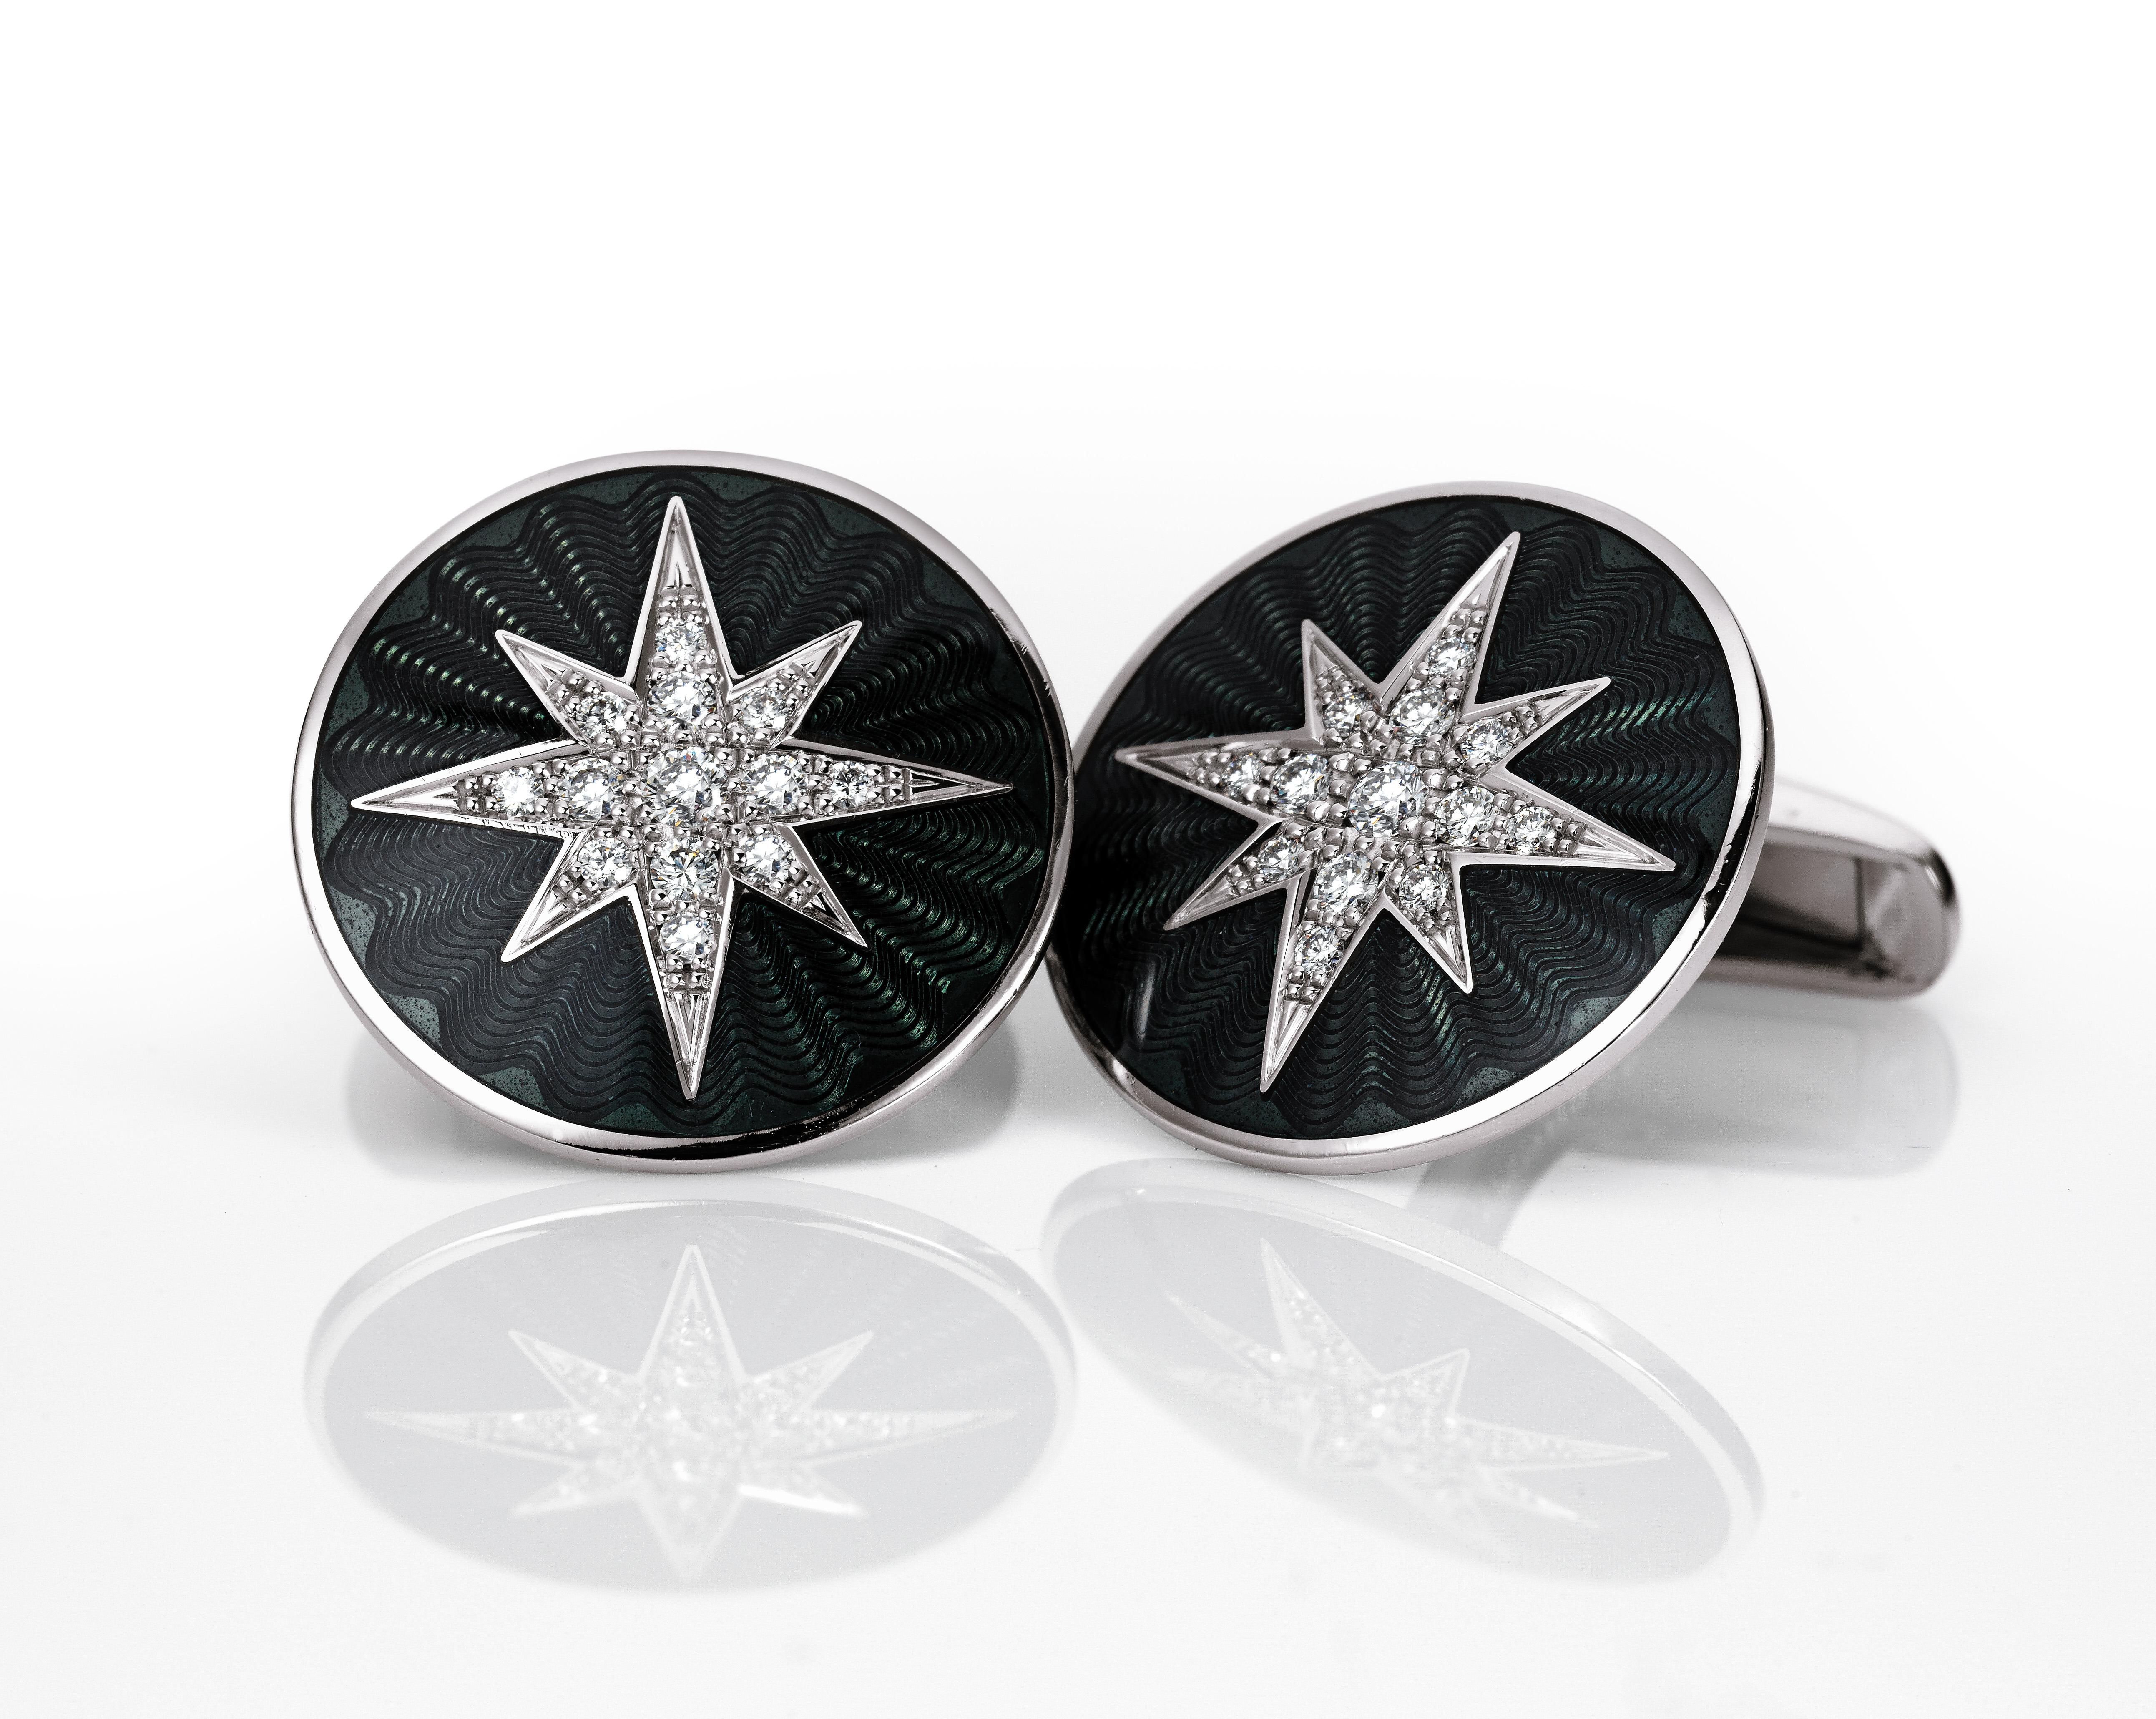 Victor Mayer Cuff links, 18k white gold, vitreous enamel, 26 diamonds brilliant cut total 0,40 ct, G VS

Reference: V1063/GU/00/00/101
Material: 18k white gold
Diamonds: 26 brilliants total 0,40 ct, G VS
Dimensions: Ø 20 mm
 
We offer this piece of